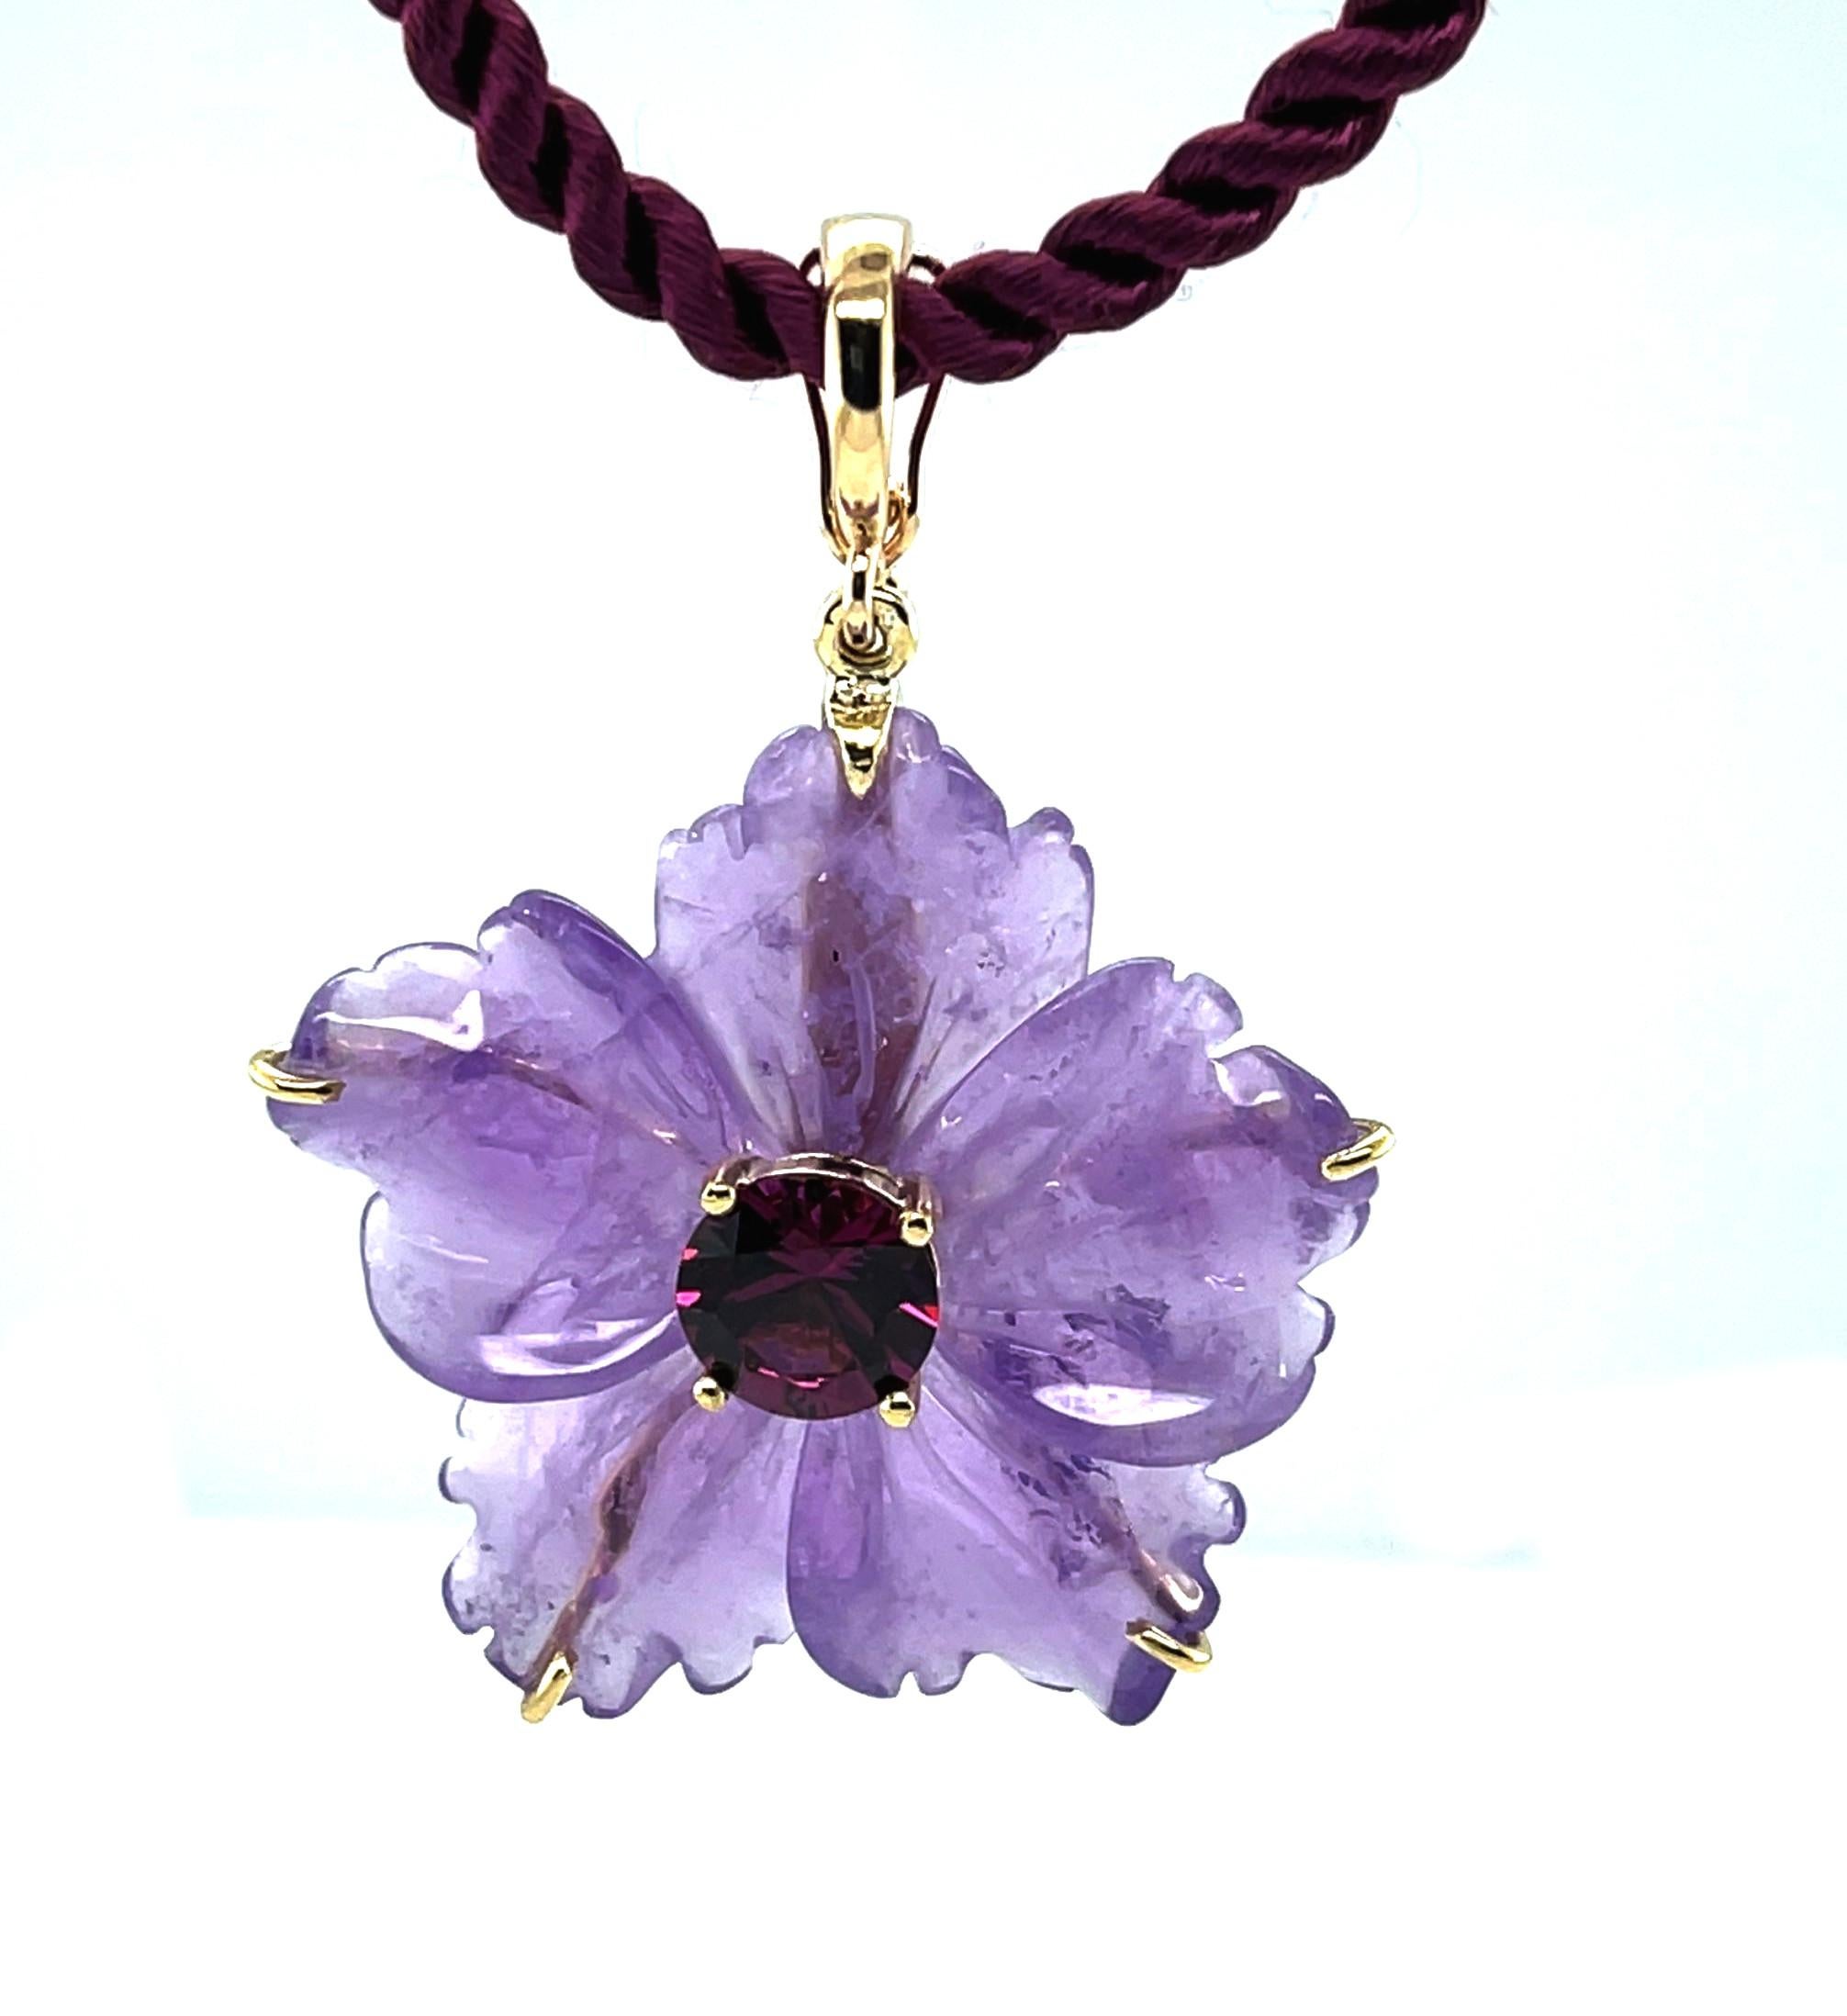 This beautifully carved amethyst flower pendant is so pretty and fun! A single amethyst crystal has been hand carved into a five petaled flower with lovely 3 dimensional curves and a soft, detailed outline. Set in the middle of the flower is a